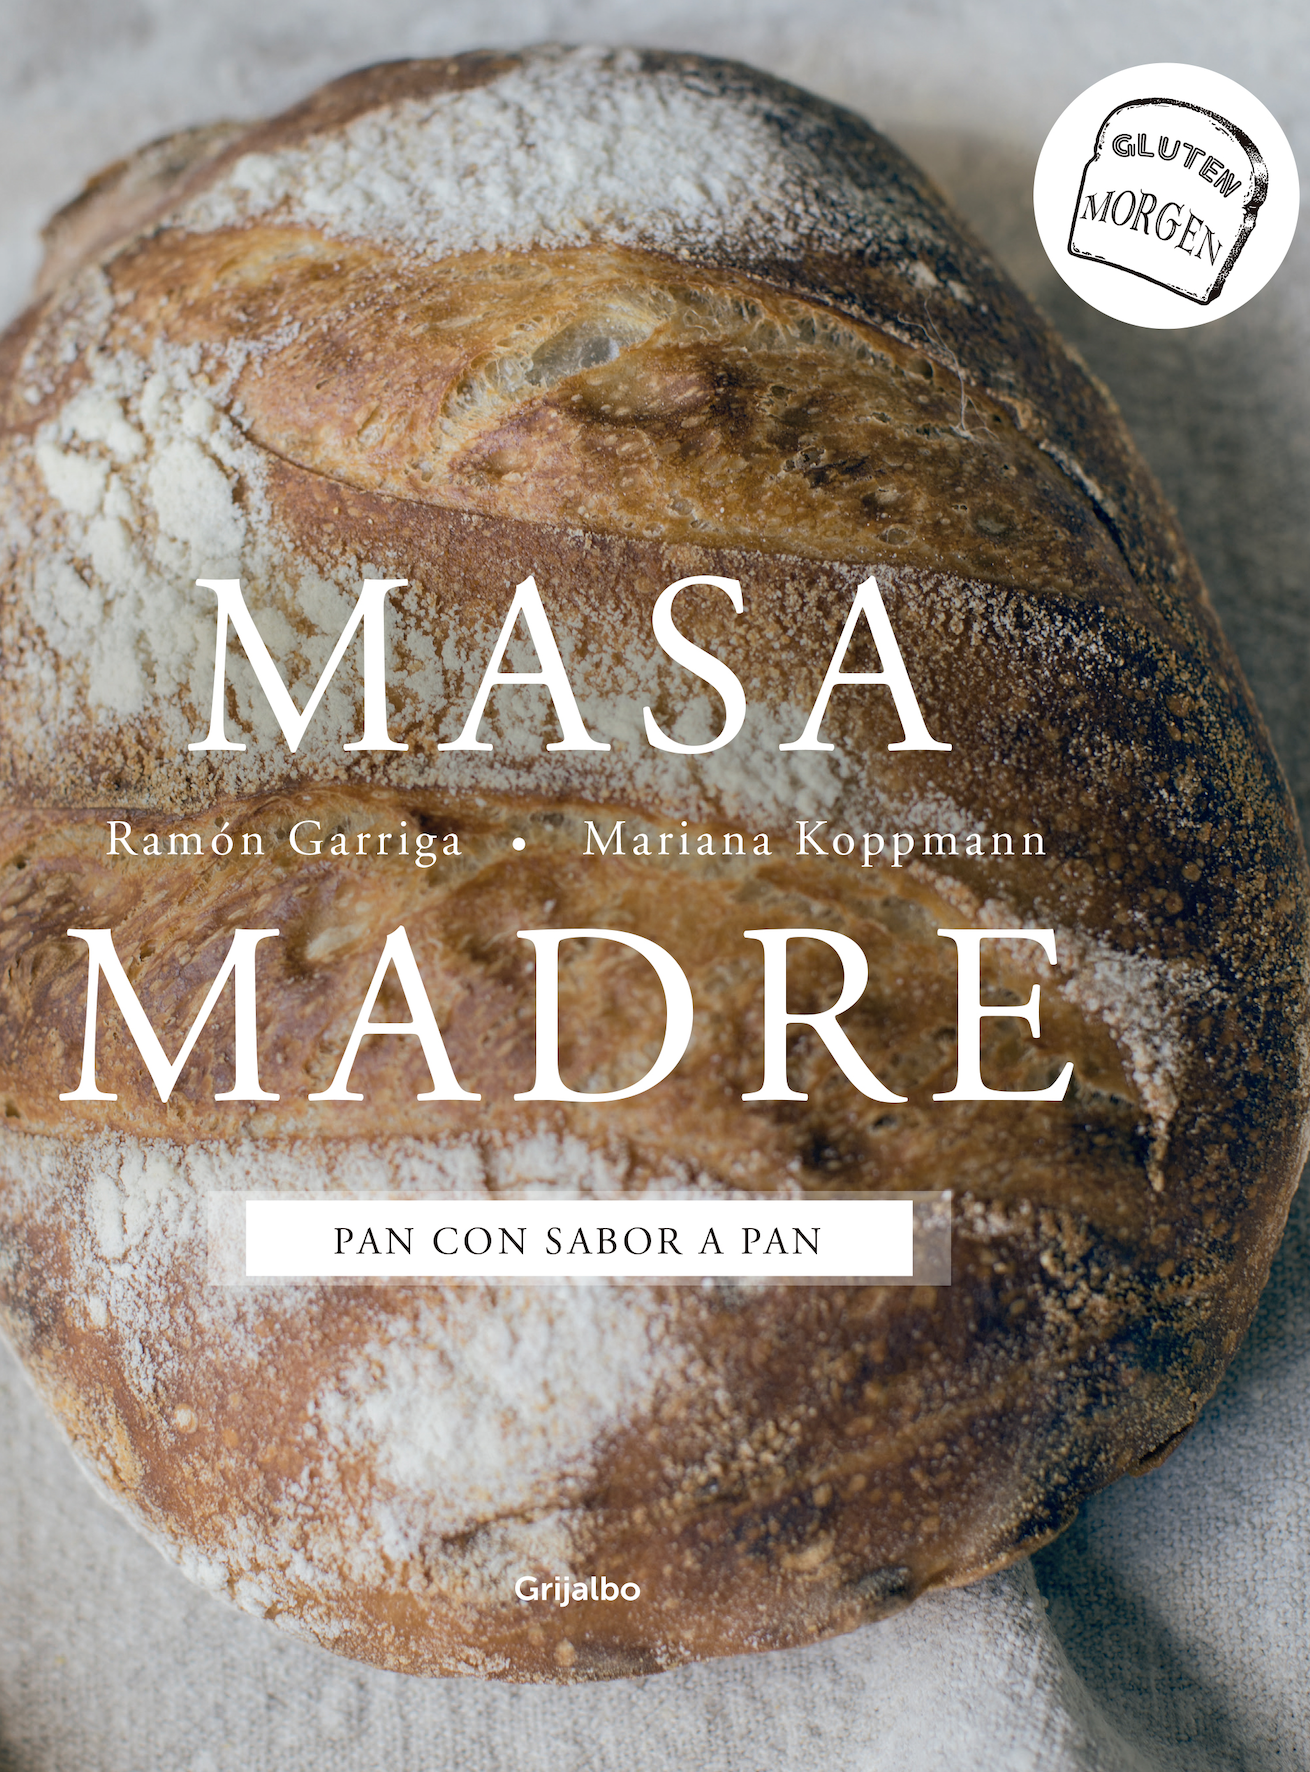 interview with Mariana Koppmann biochemist author sourdough bread scientist based in buenos aires argentina south america follow her on instagram 6